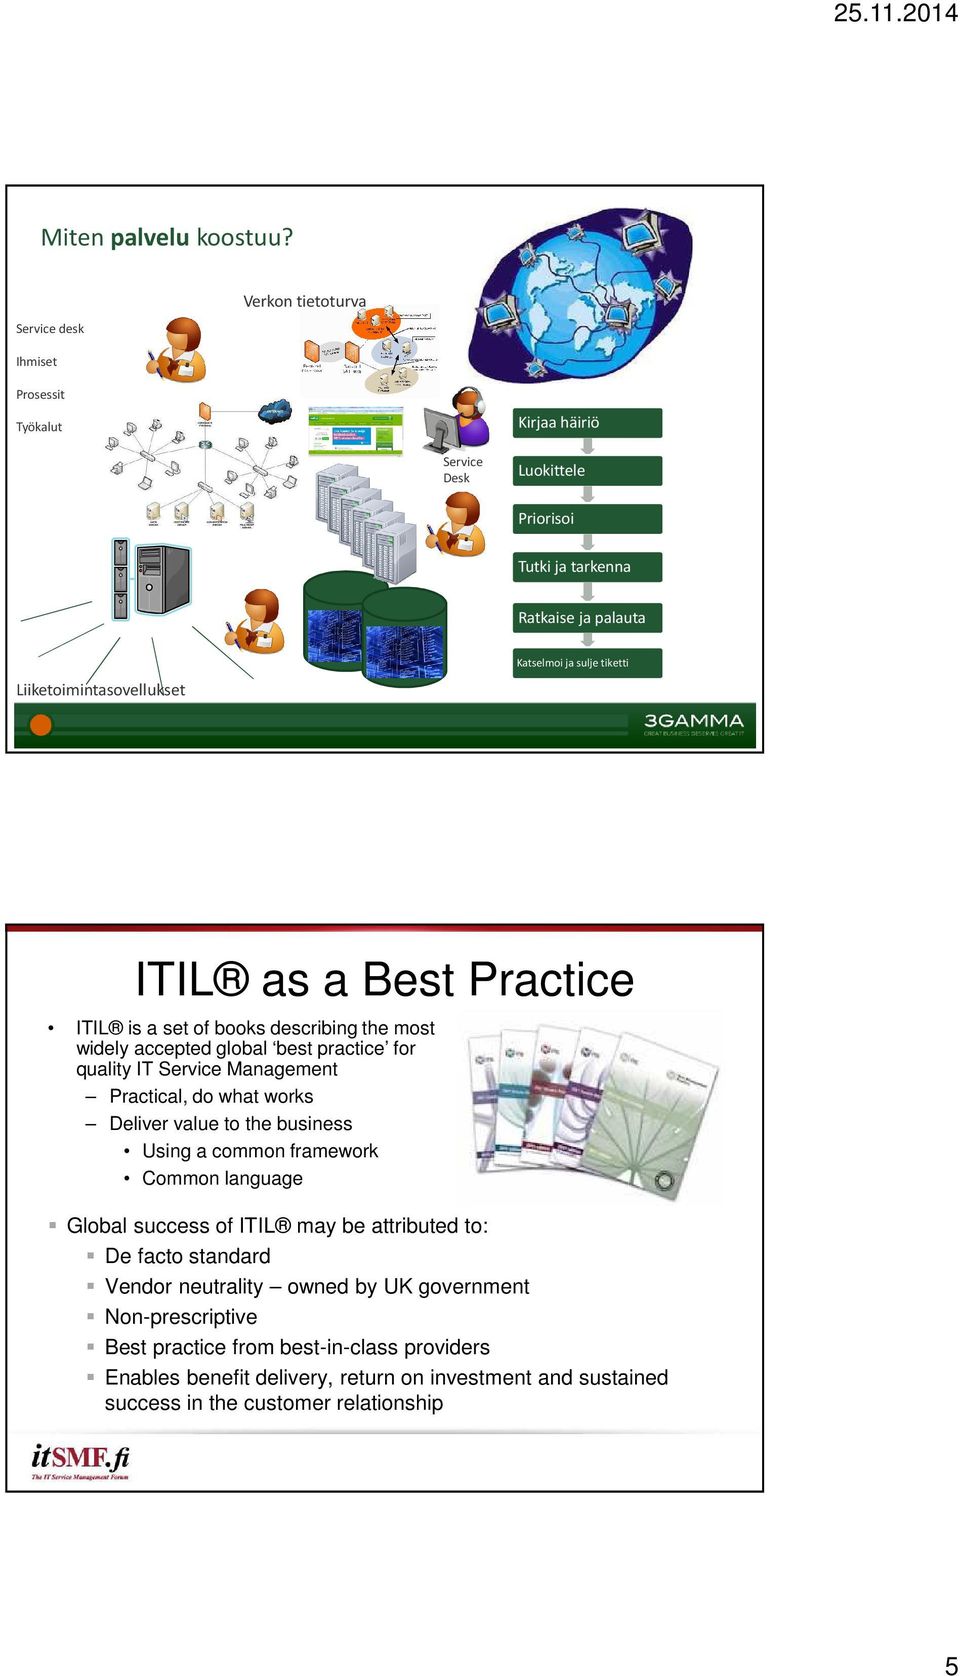 ja sulje tiketti ITIL as a Best Practice ITIL is a set of books describing the most widely accepted global best practice for quality IT Service Management Practical, do what